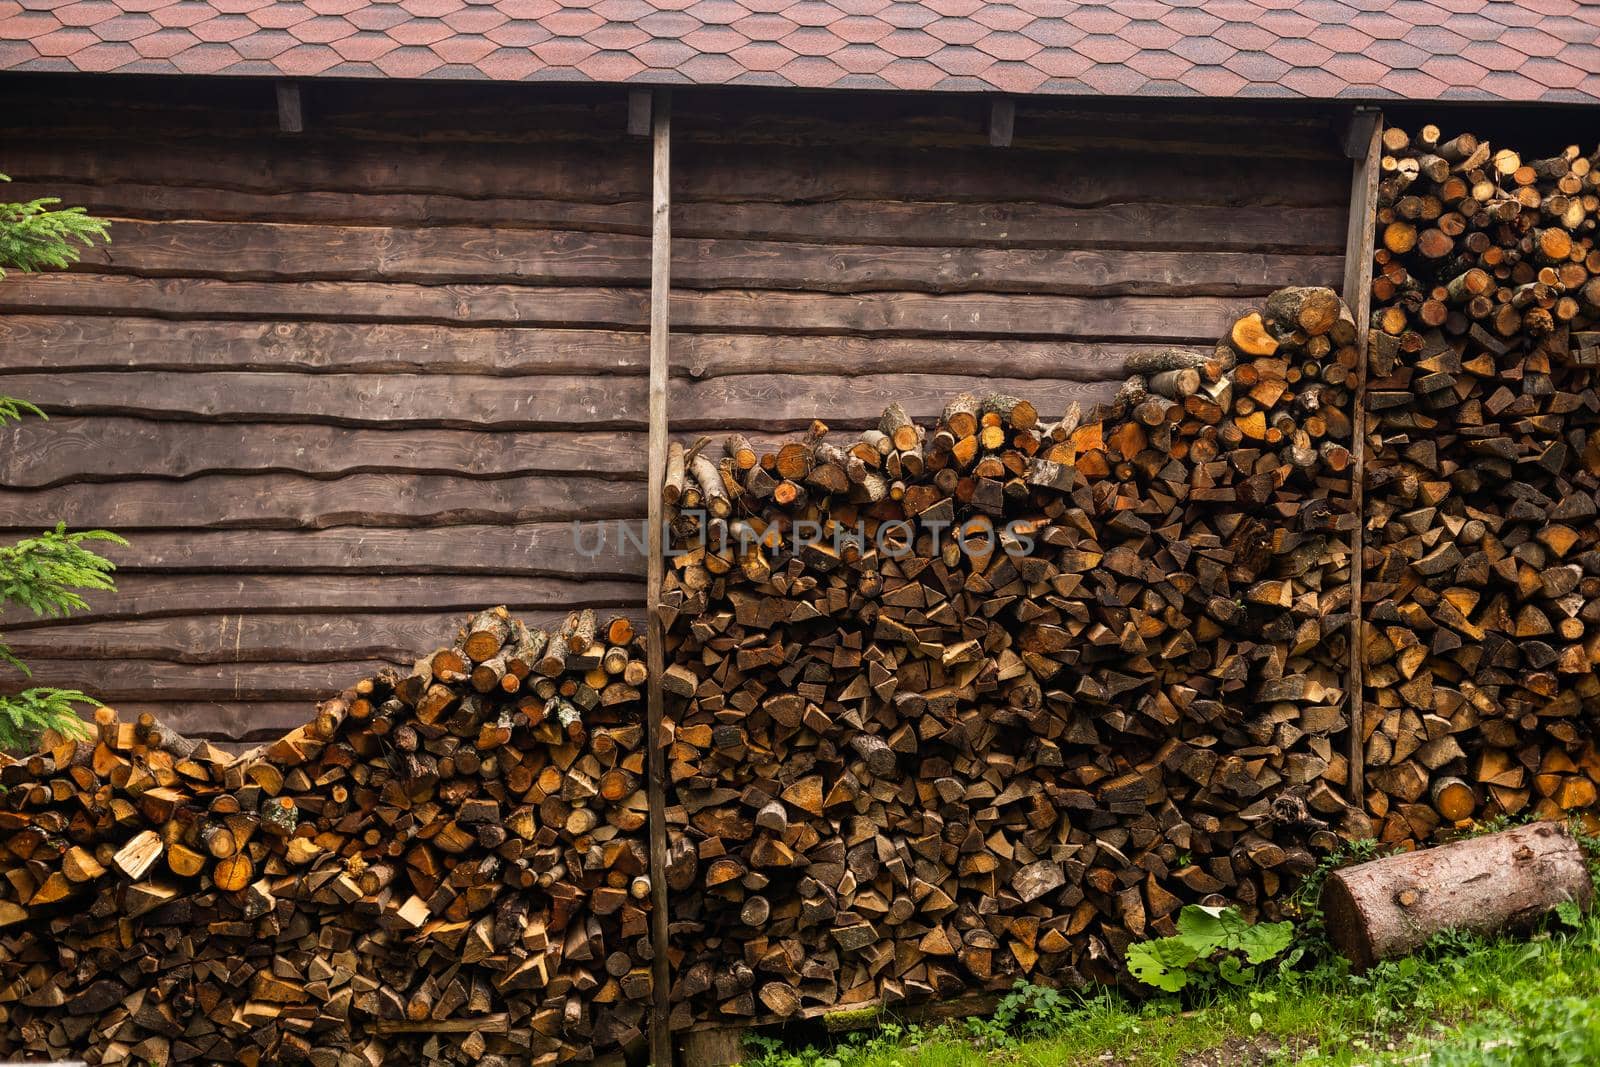 stacked firewood and dry branches. firewood for kindling stoves, barbecue. harvesting firewood for the winter. cutting down old trees. fuel by Andelov13